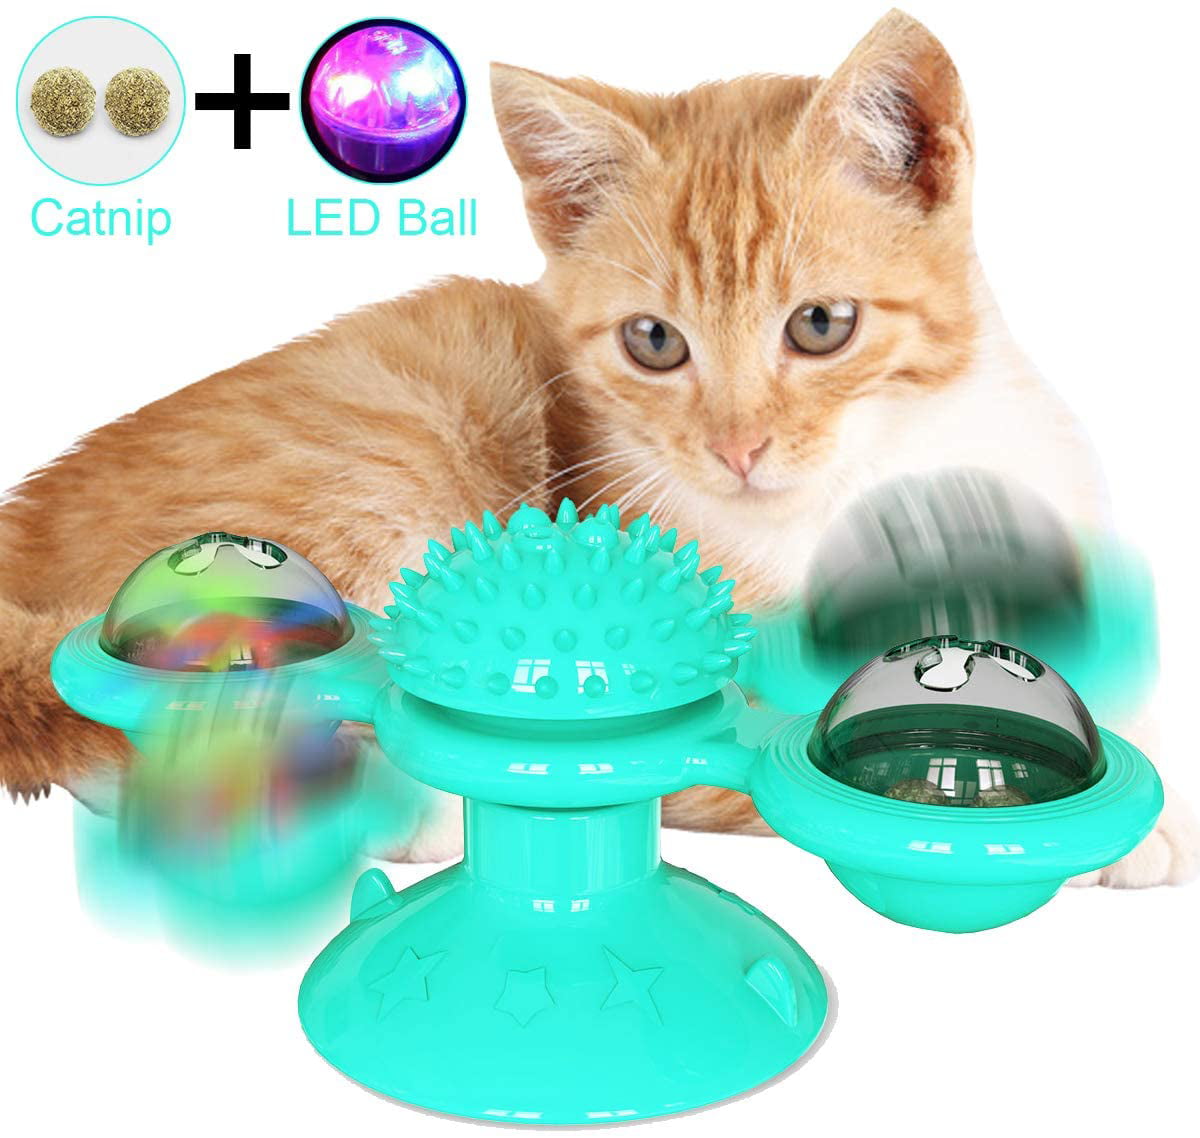 Windmill Cat Toy Scratching Tickle Cats Hair Brush Funny Kitten Catnip Toy With Cat Toy LED Pointer Turntable Teasing Interactive Cat Toys for Indoor Cats with Suction Cup Rotating Windmill Cat Toy 